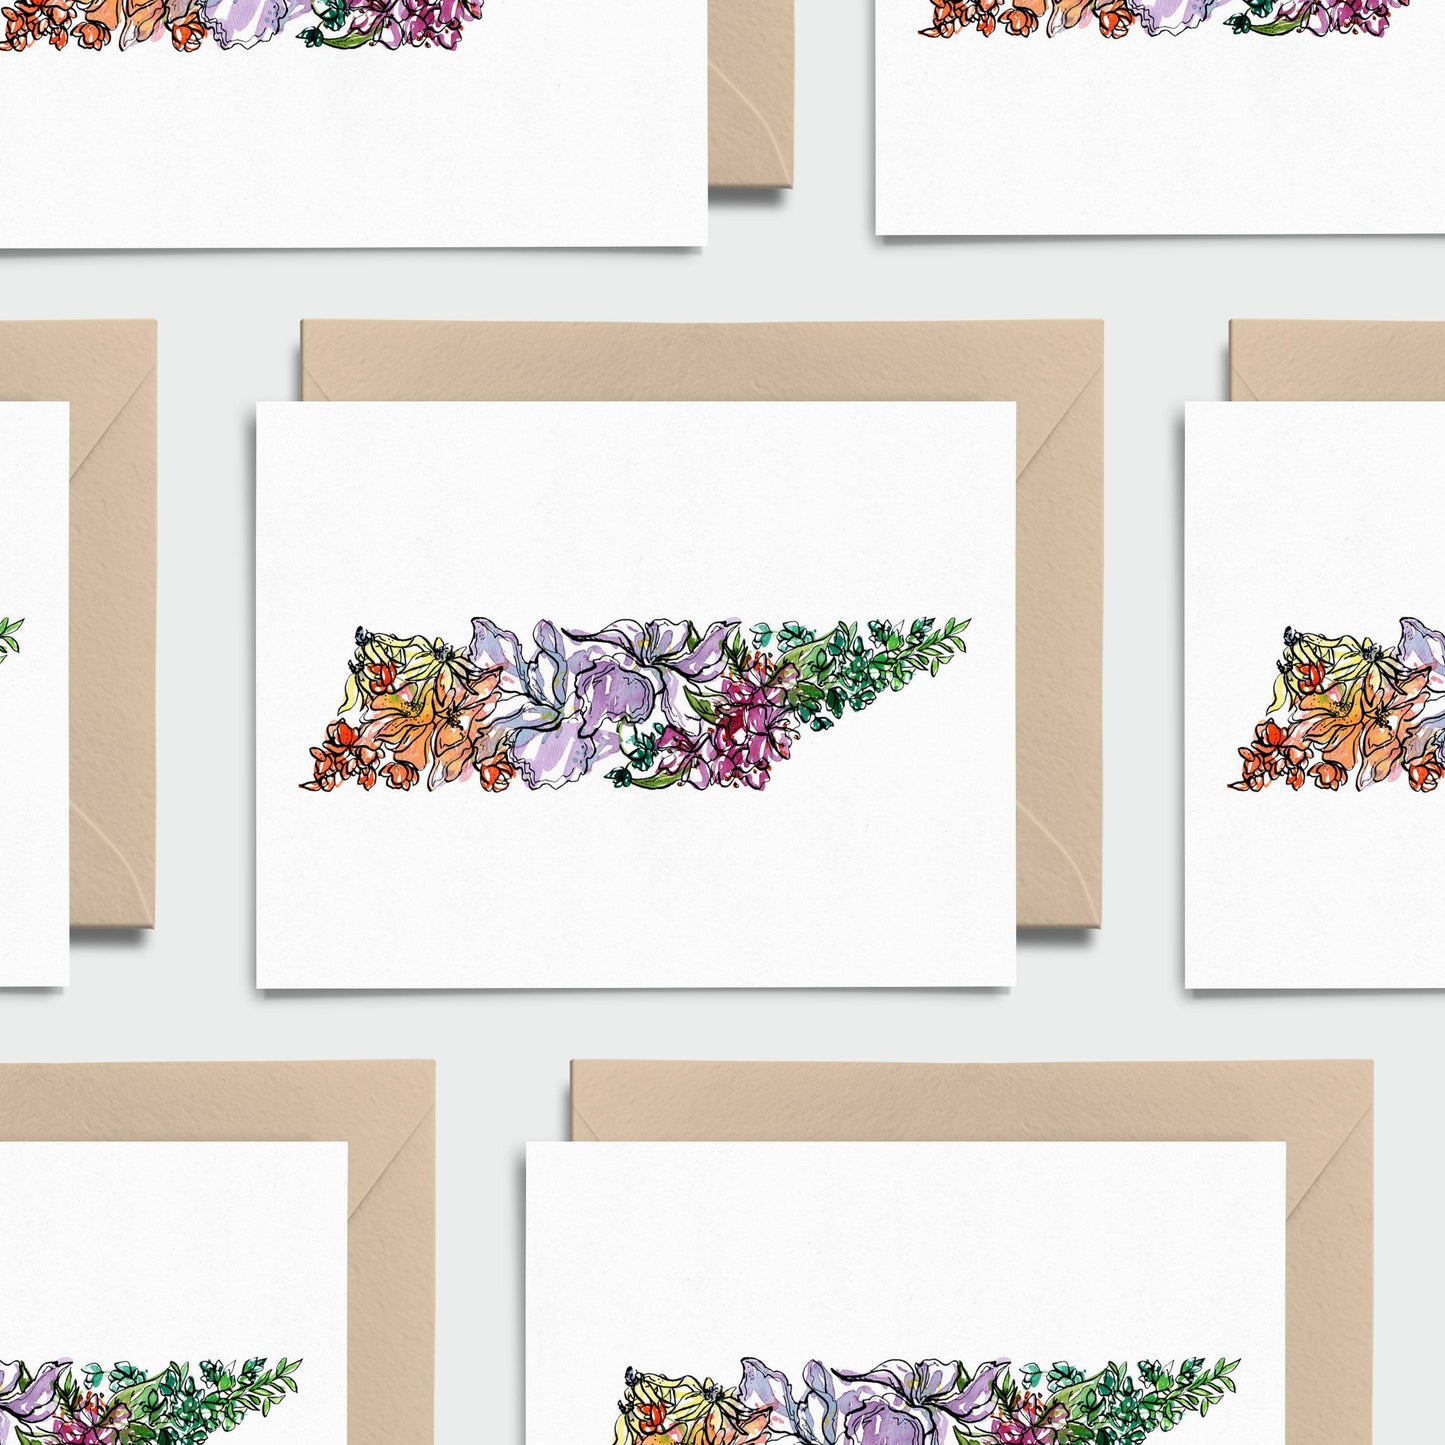 Amanda Klein Co. - Tennessee Notecards Stationery Set // Featuring MI Flowers